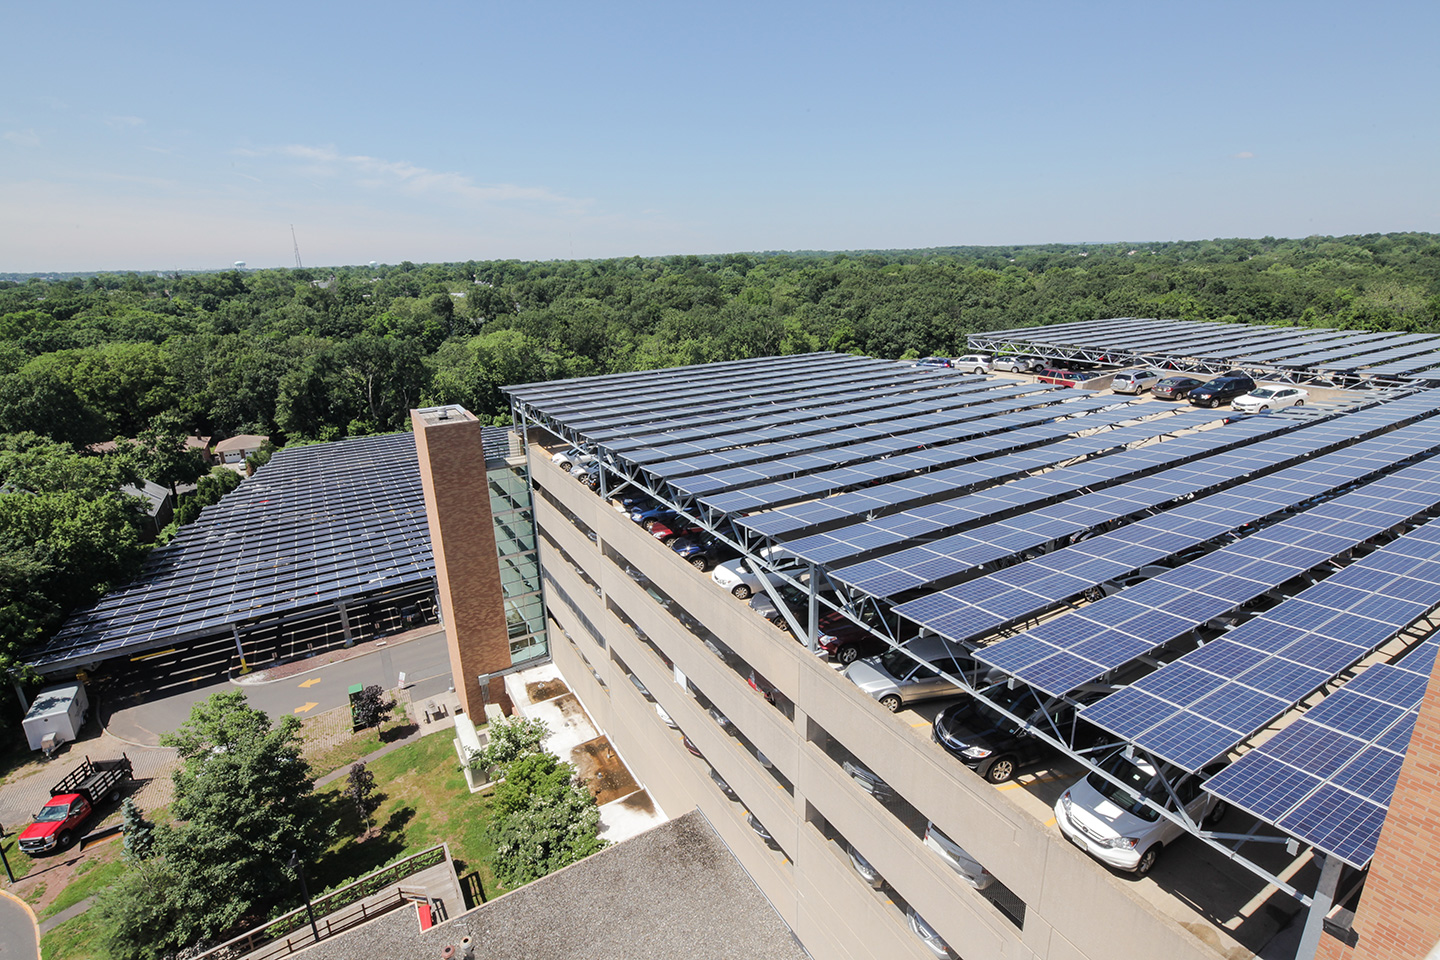 Installing solar panels is one example of how an organization could adjust to become more energy efficient. Image courtesy of Dewberry. 